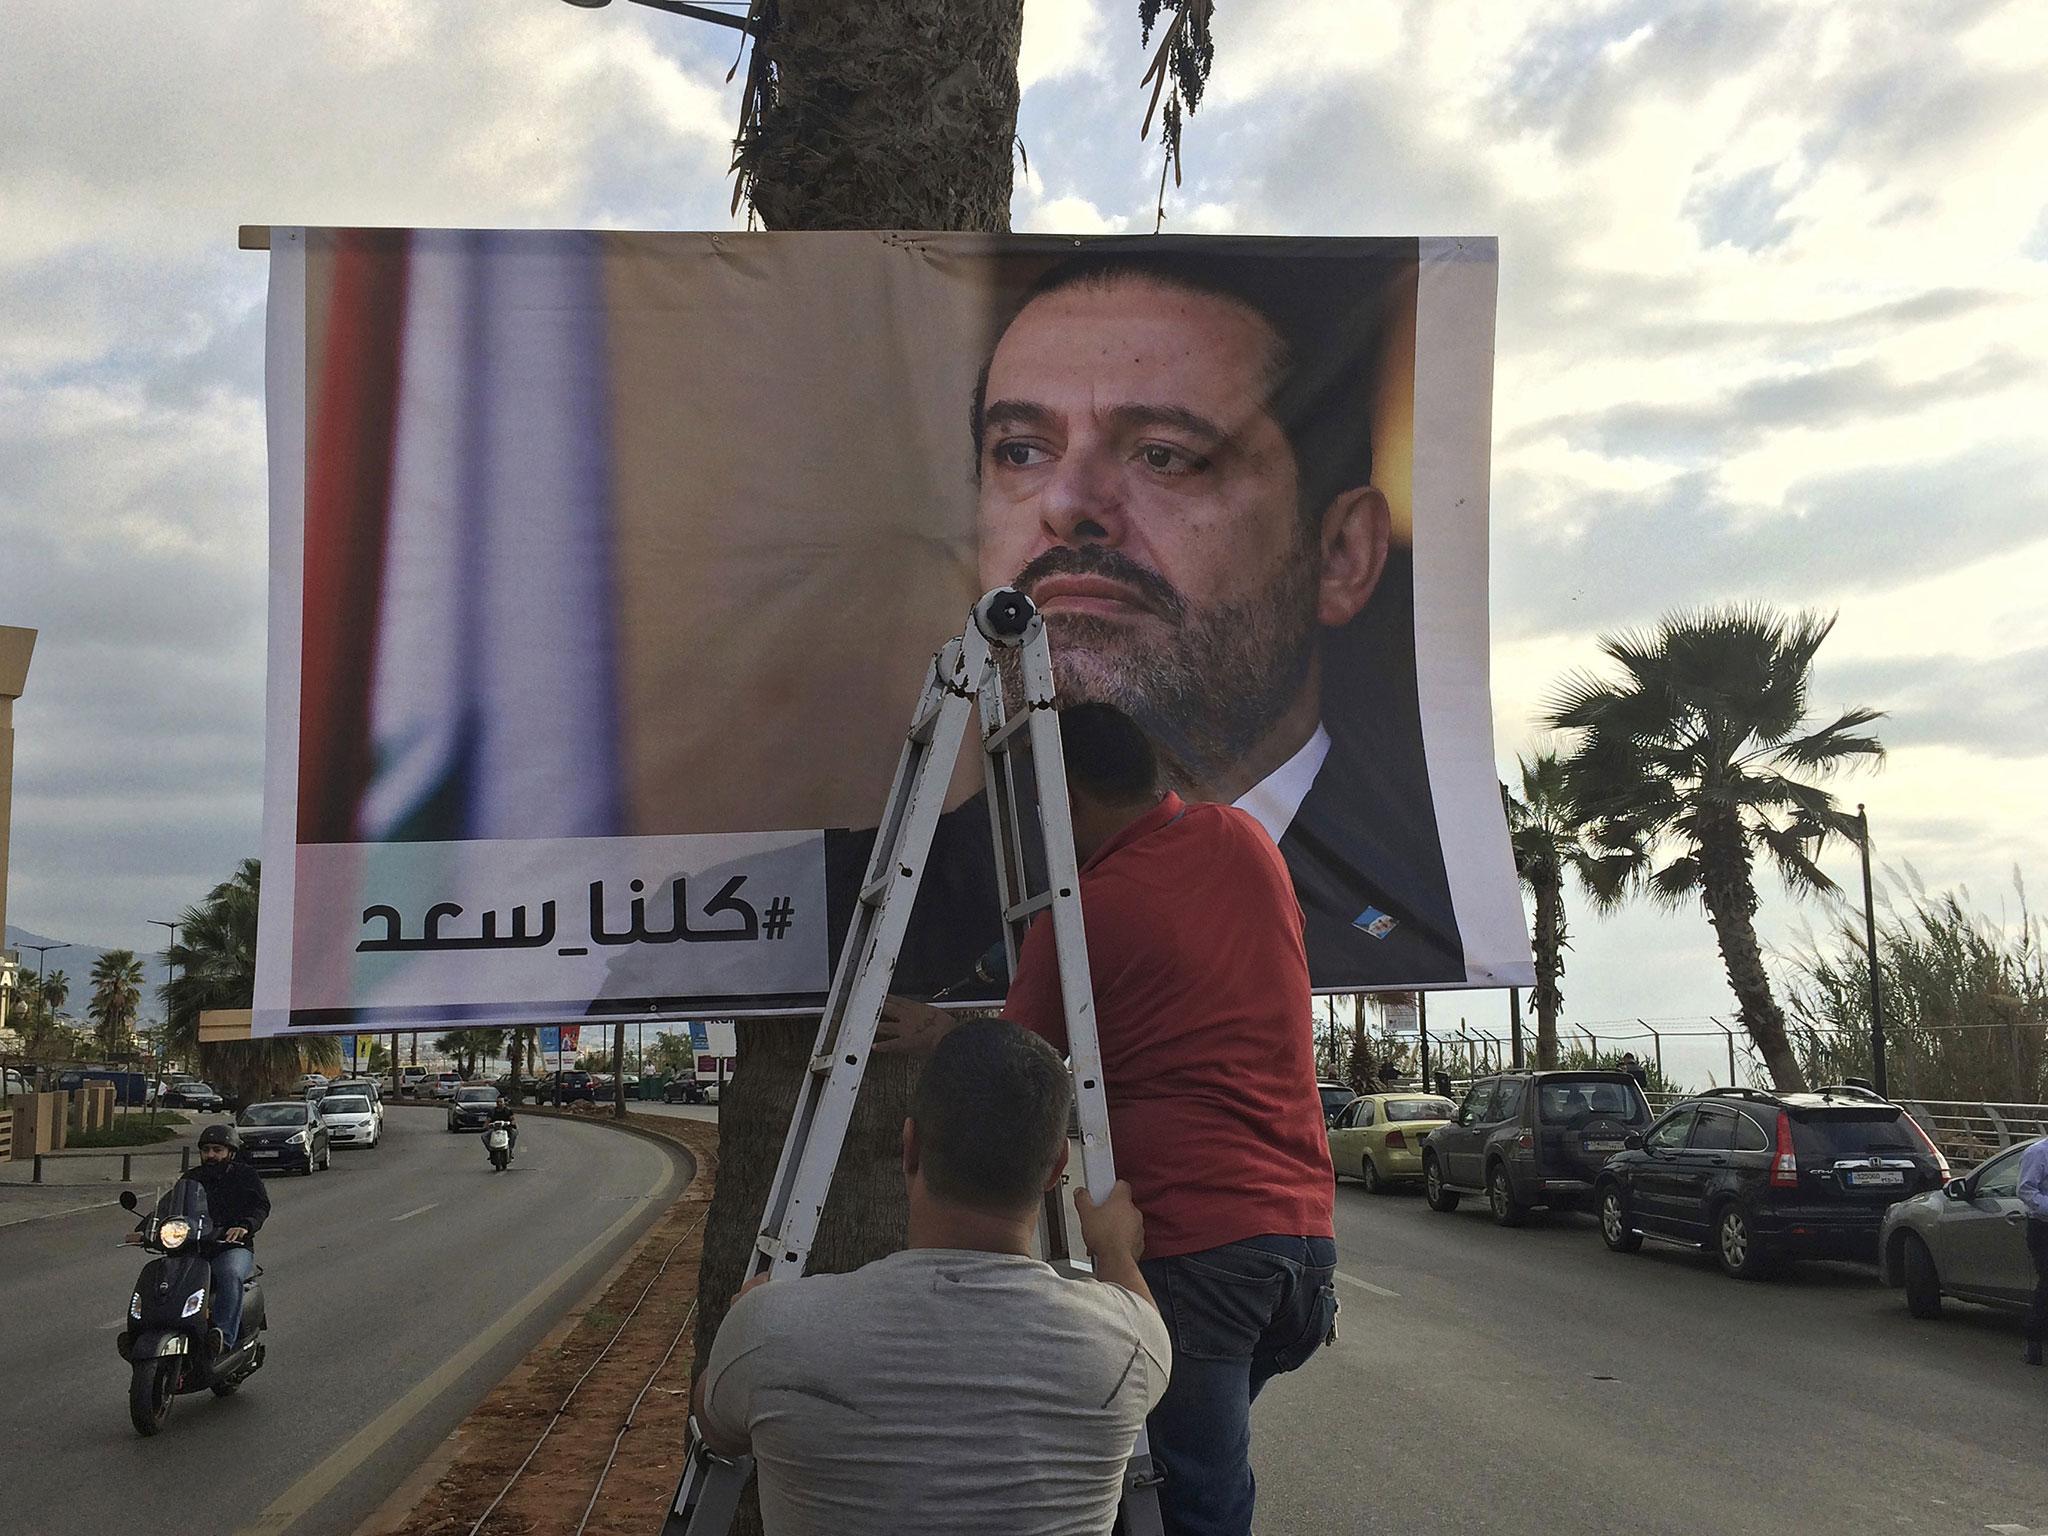 Posters of outgoing Prime Minister Saad Hariri with the words 'We are all Saad' have appeared all over Beirut in the last week